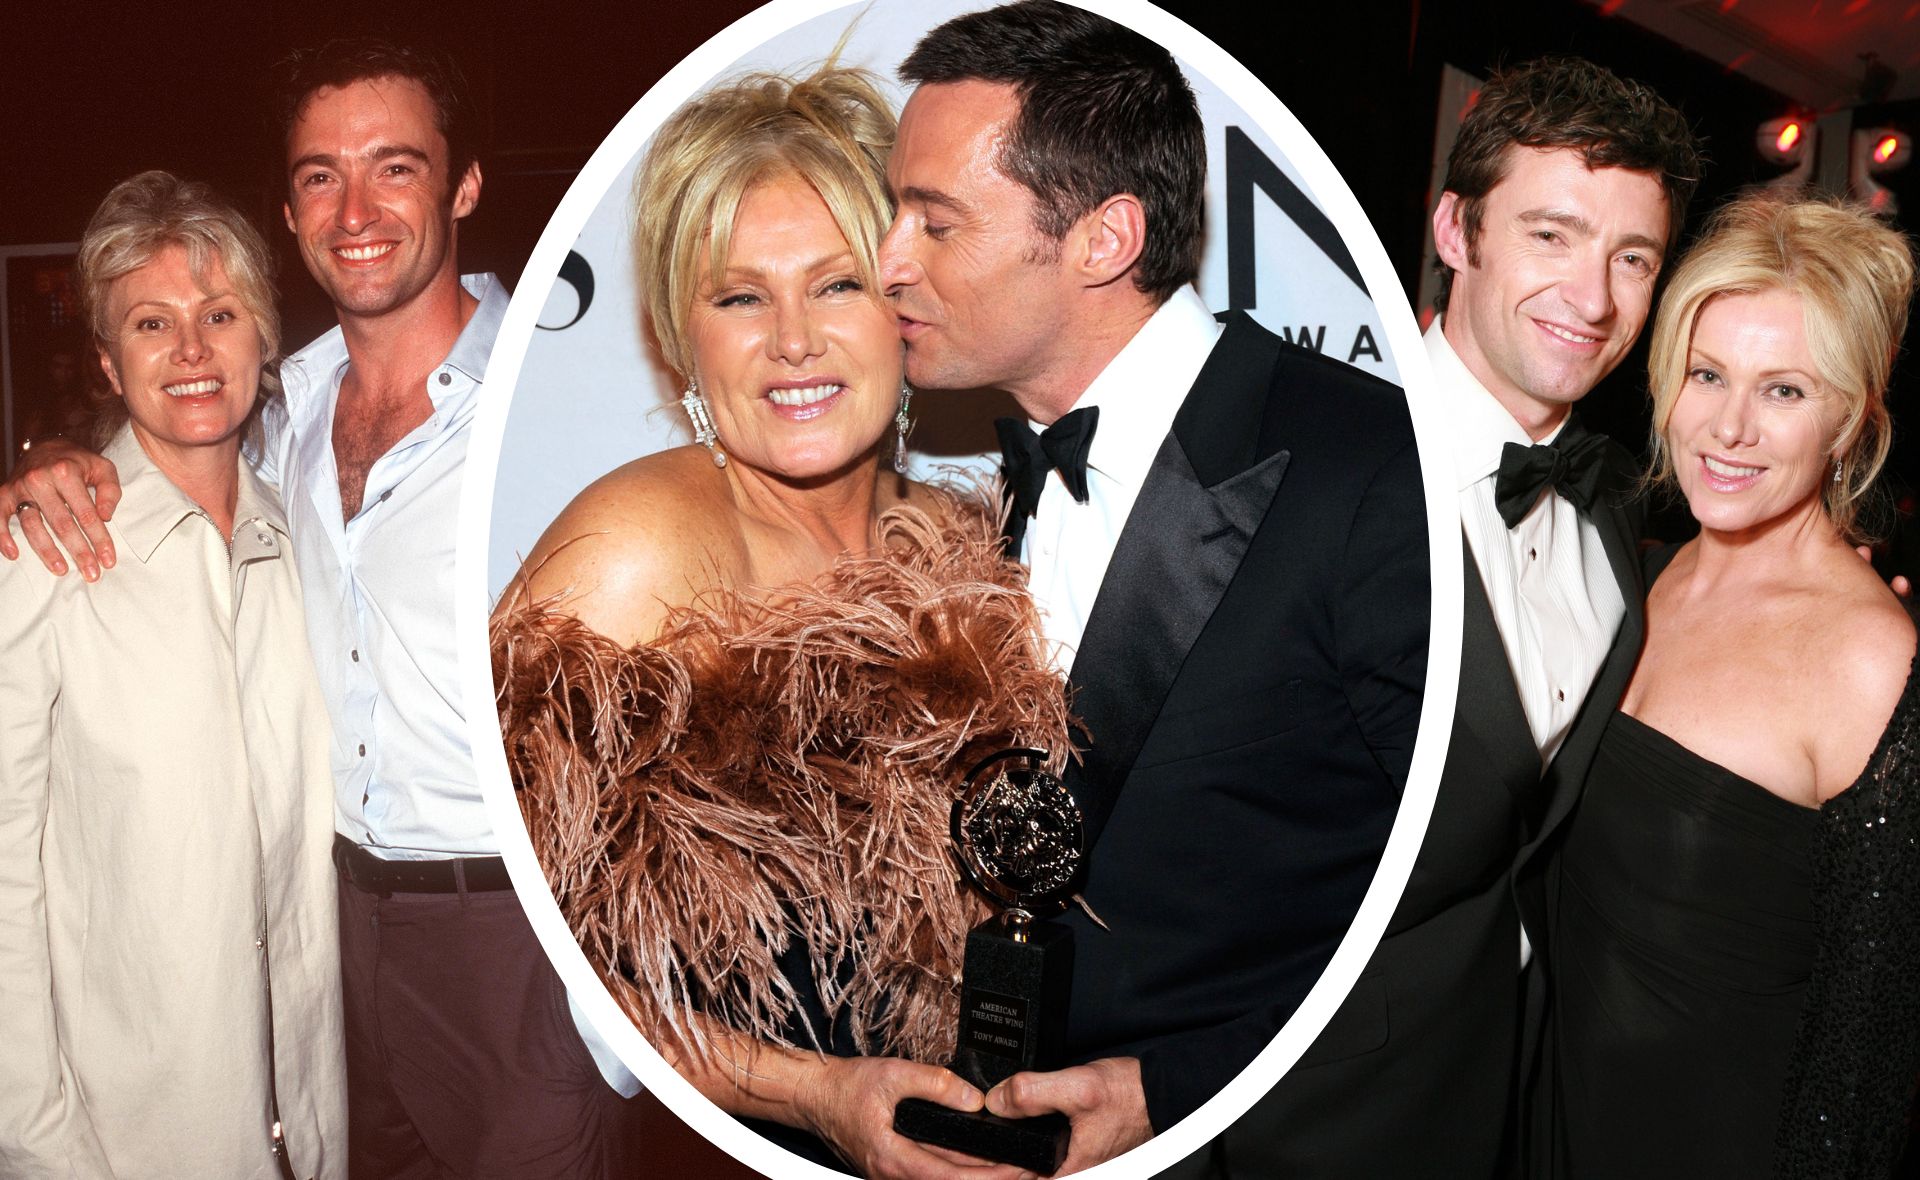 Hugh Jackman’s long-lasting love for Deborra-Lee Furness is proof that Hollywood marriages can last